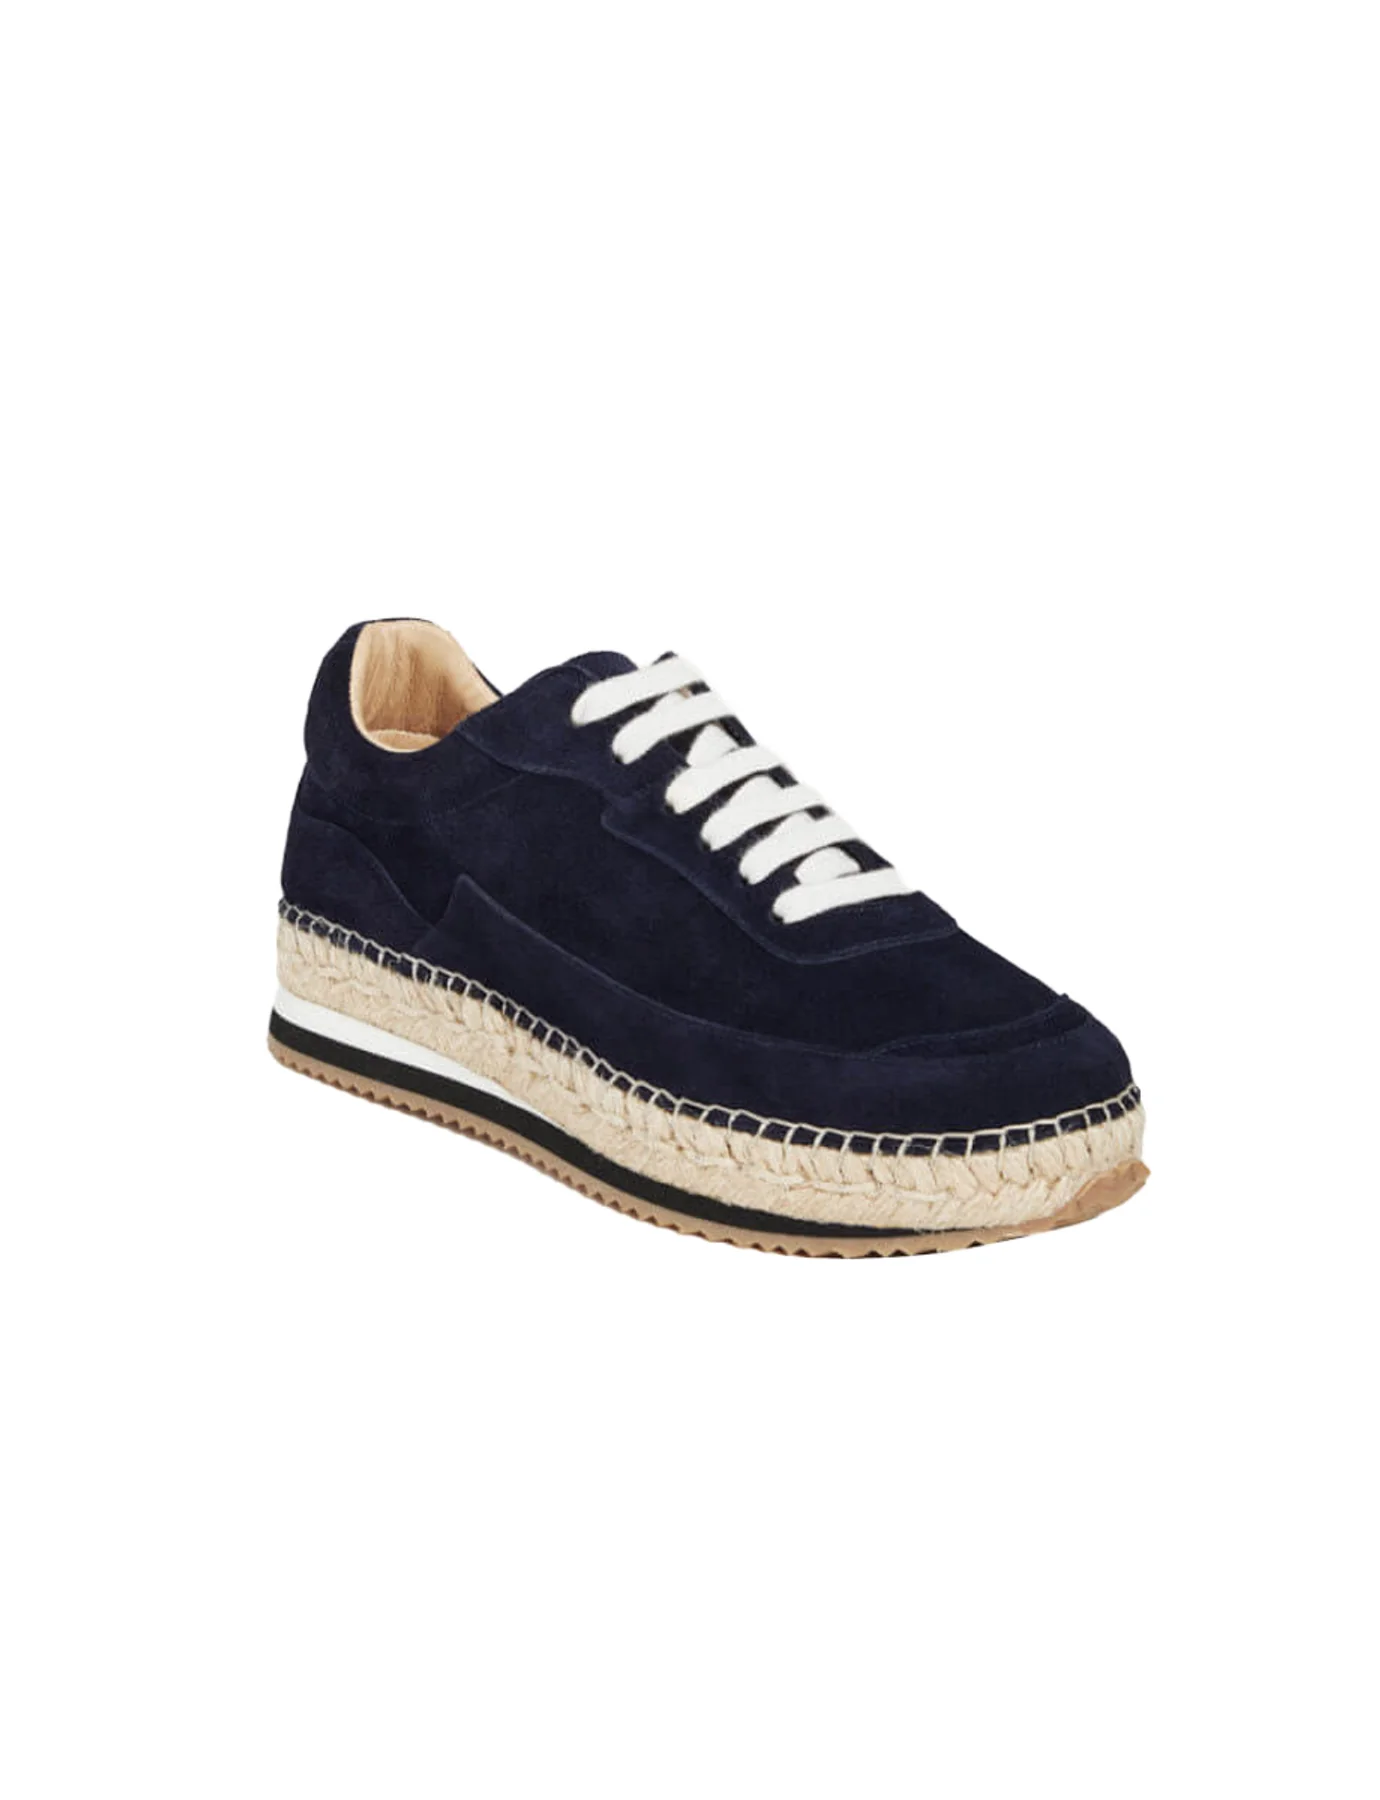 sneakers-tracy-navy-blue